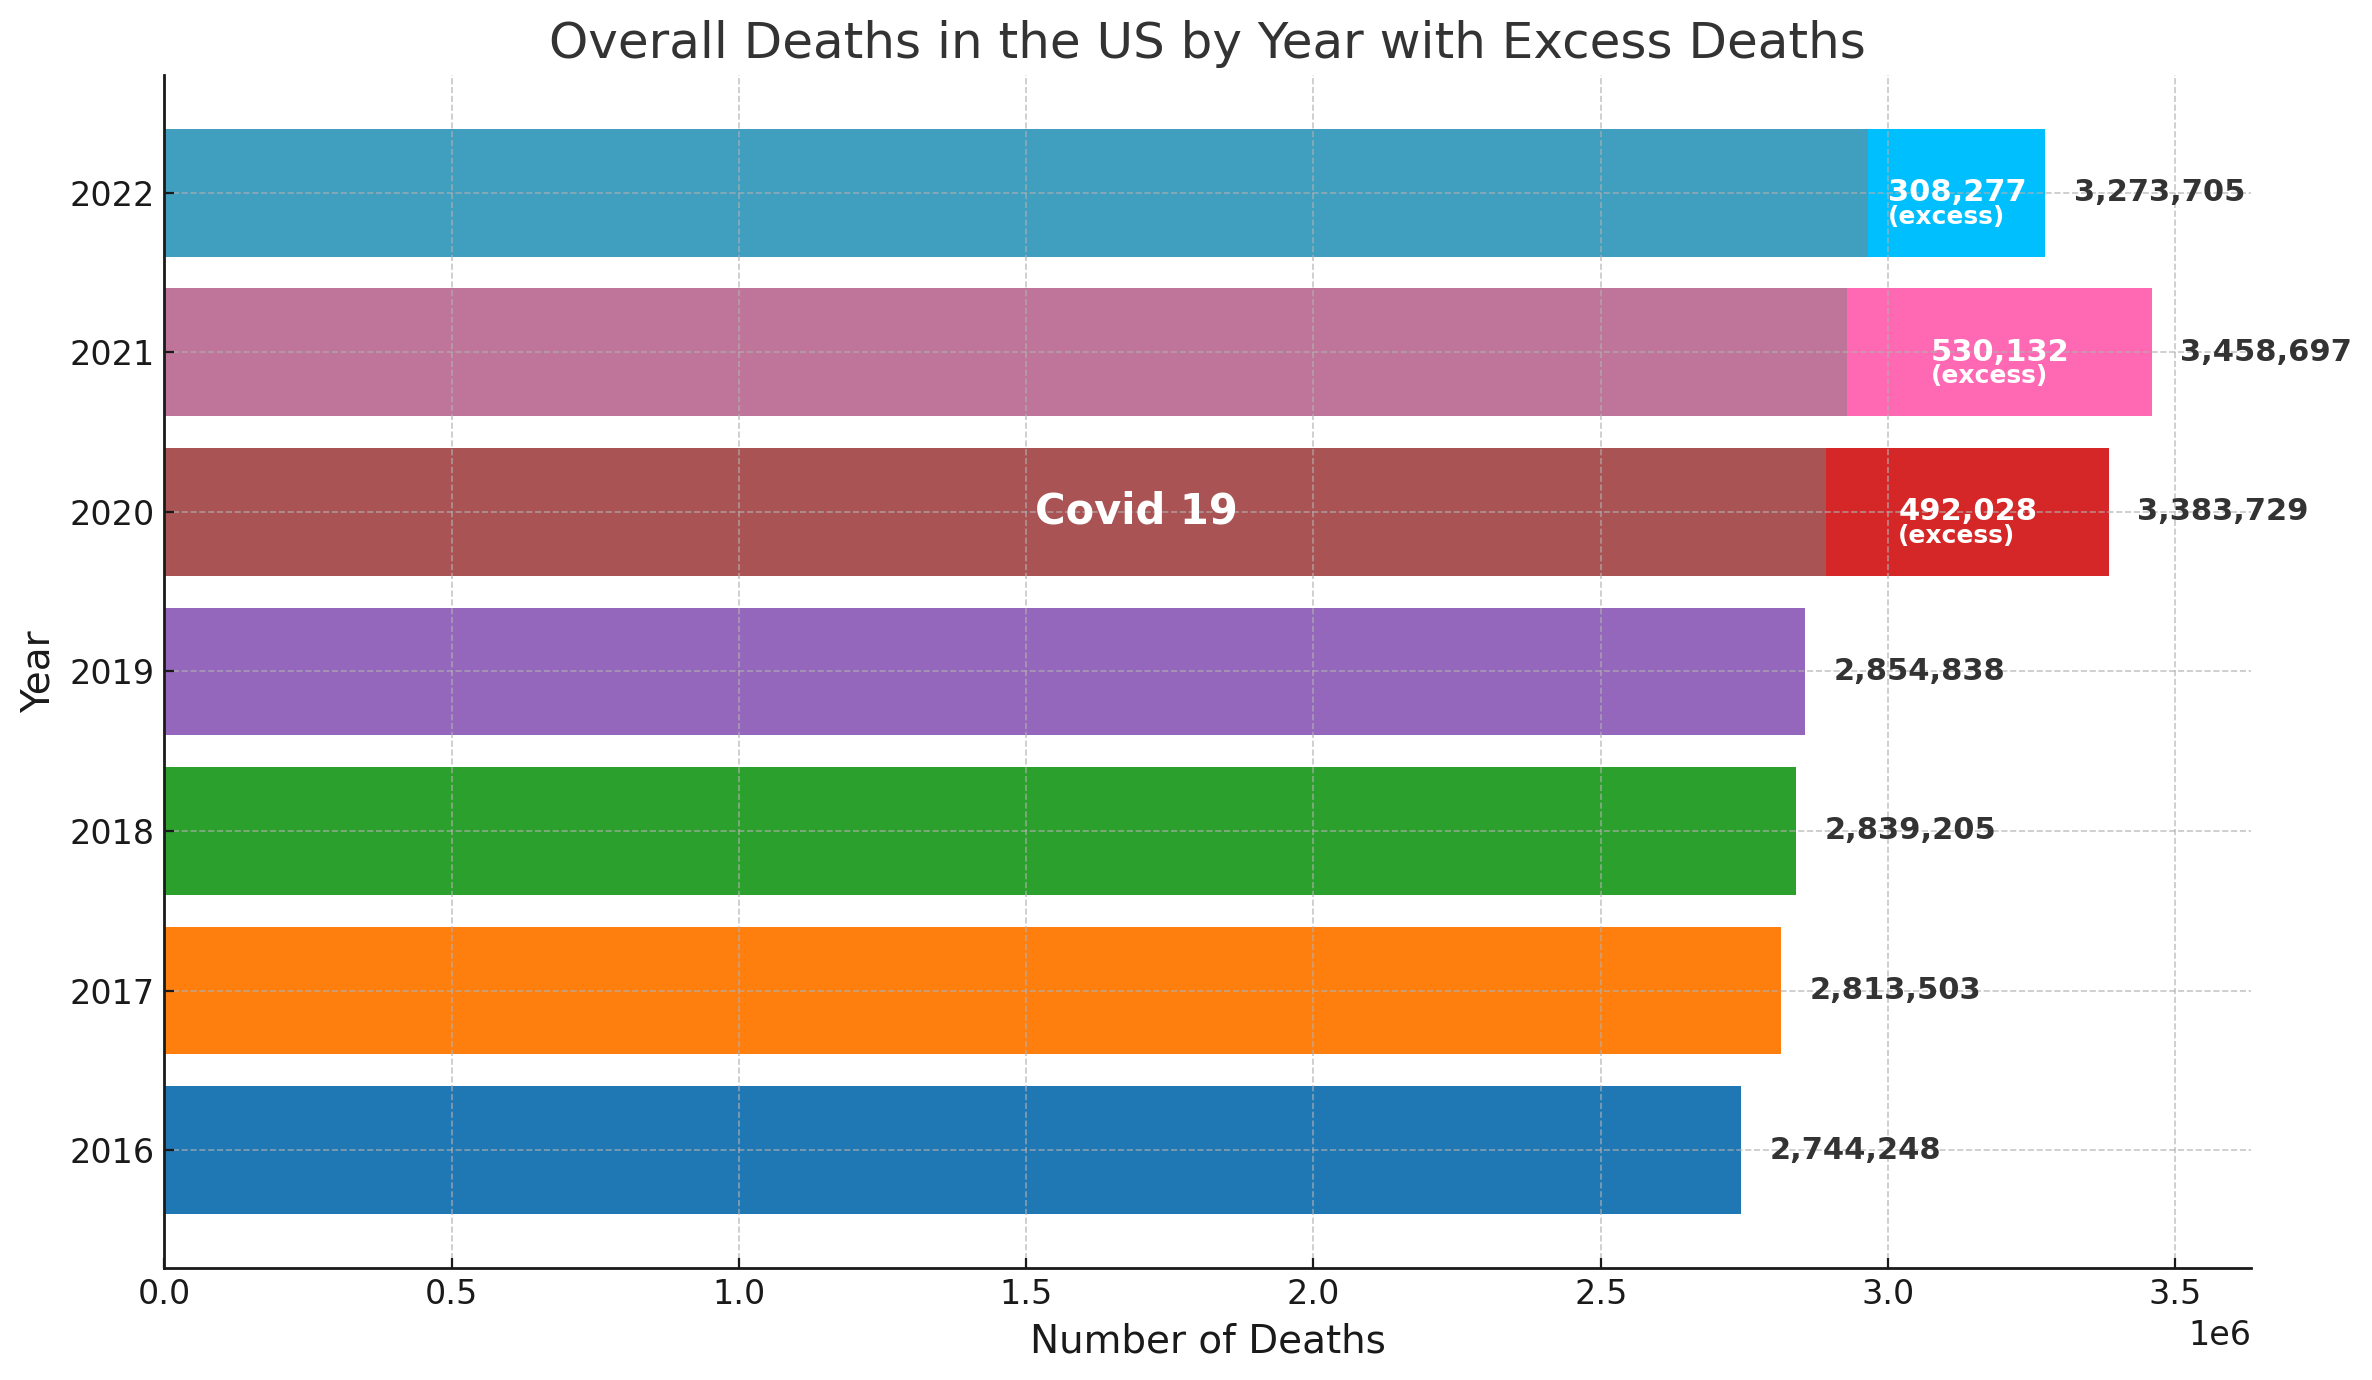 US Overall Deaths 2016-2022. Deaths jumped up dramatically in 2020 because of Covid 19.